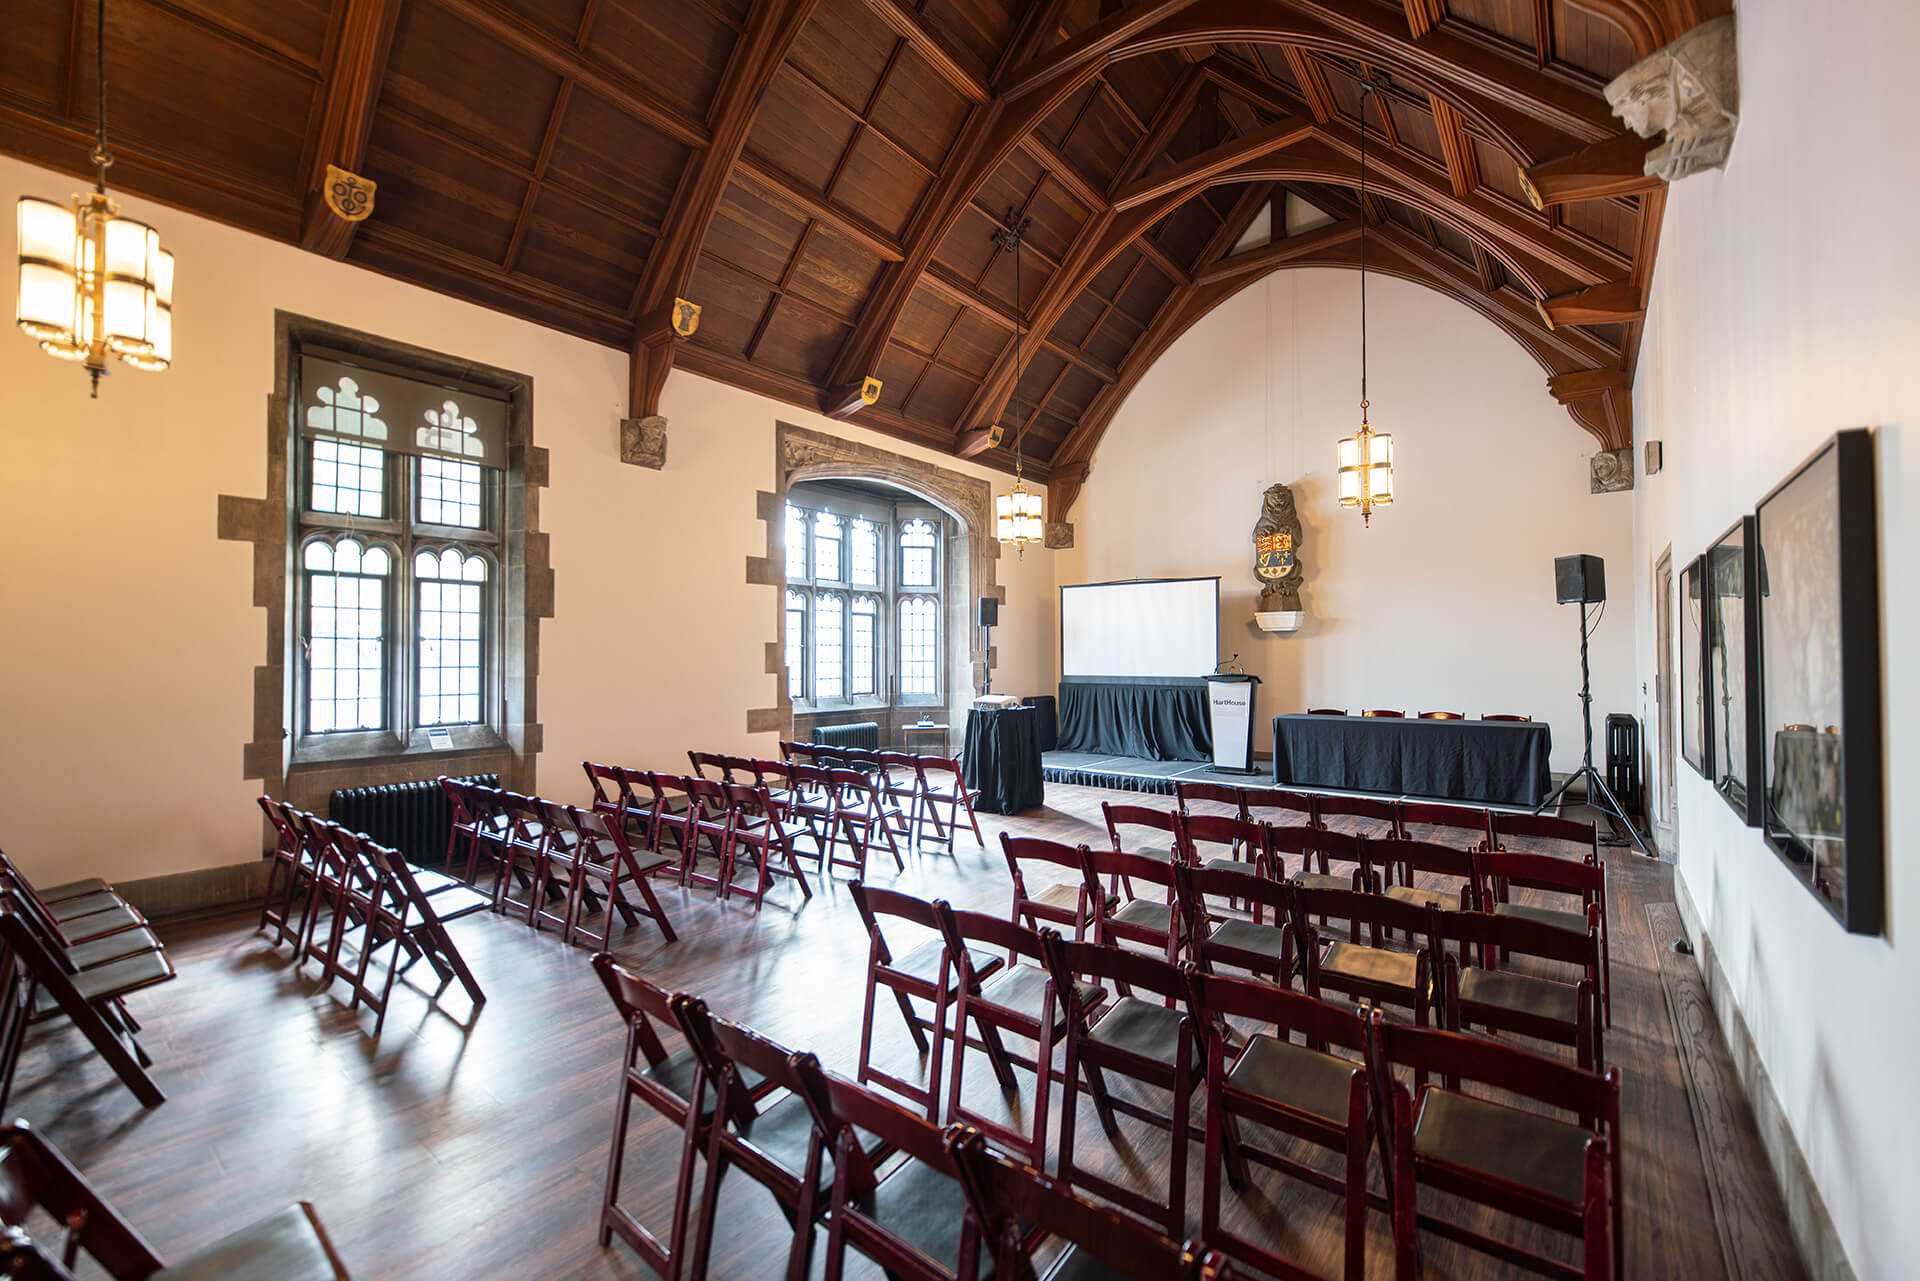 A large room with hardwood floors, gothic windows, vaulted wooden ceiling and seating arranged for an event